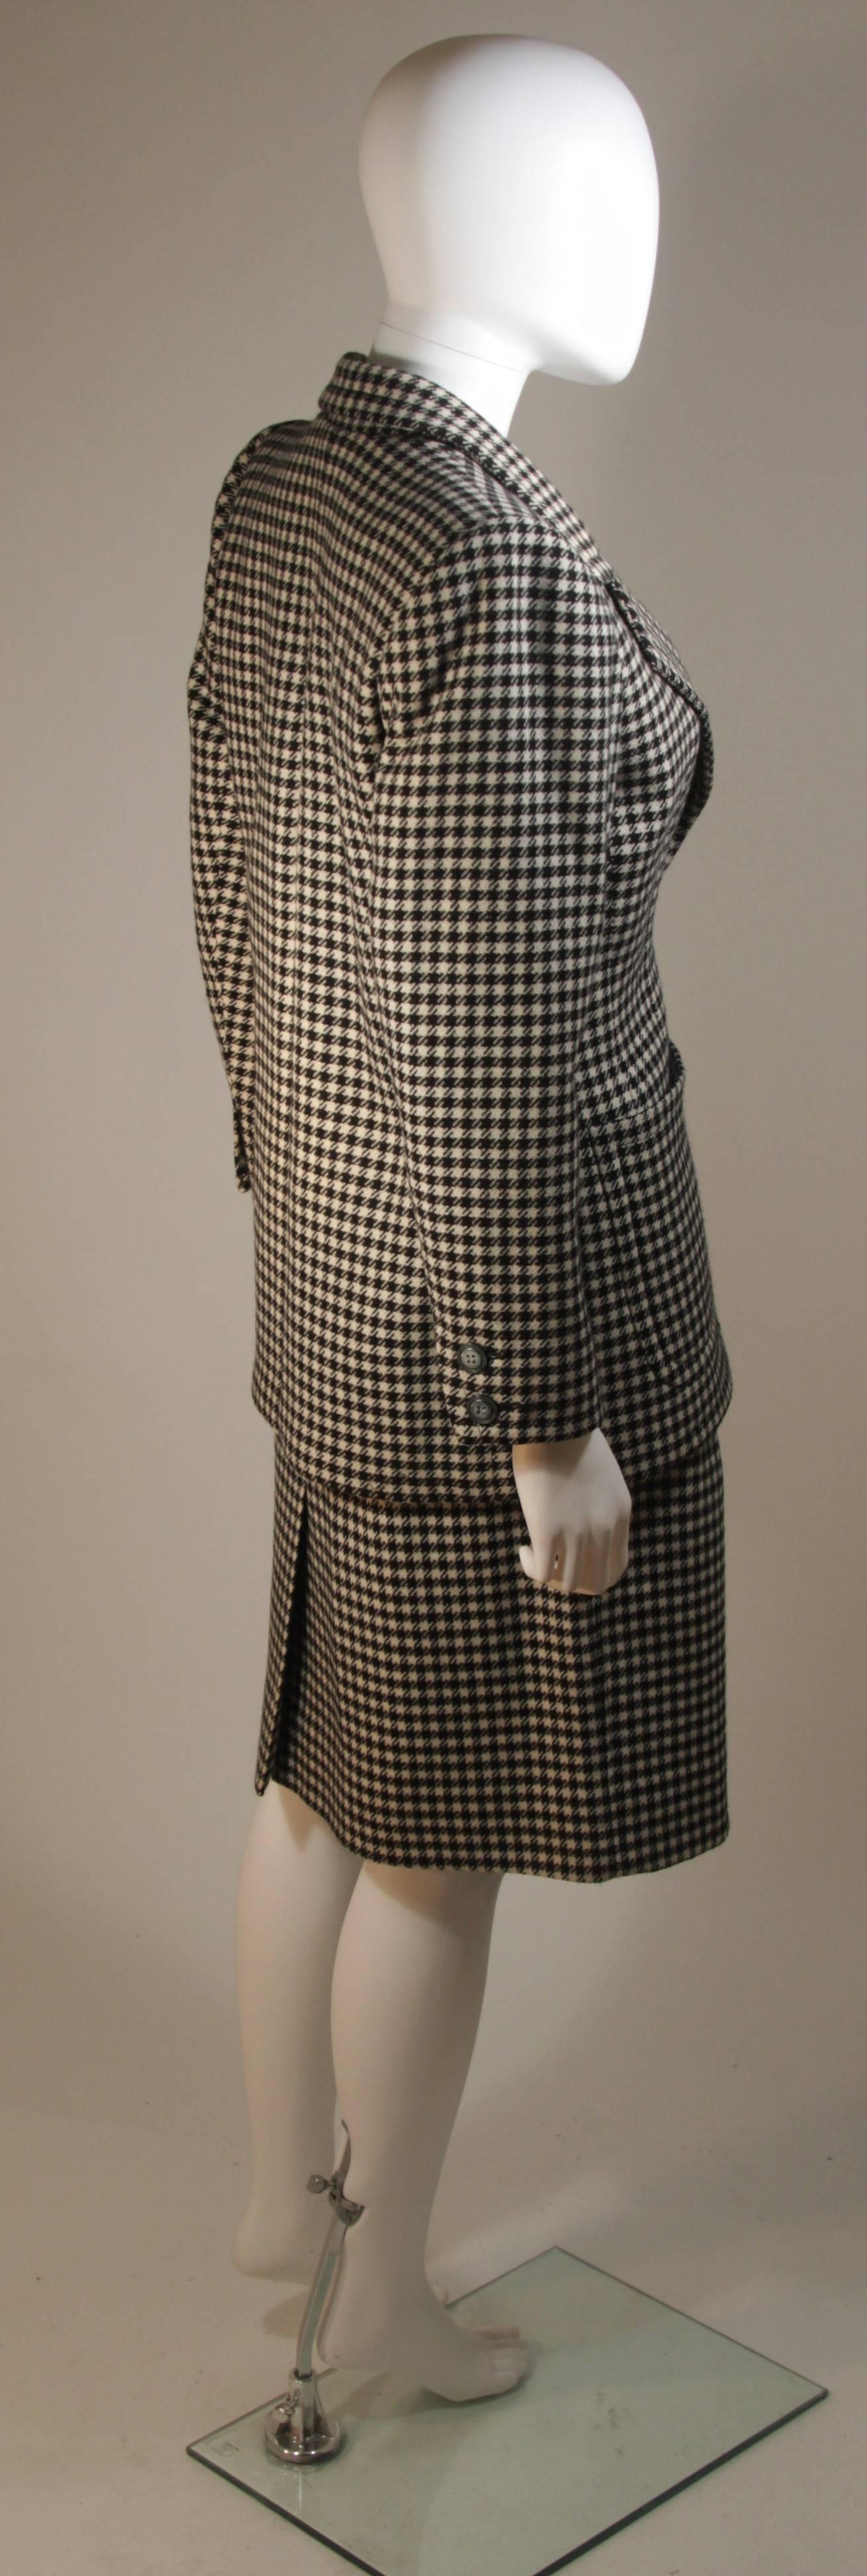 YVES SAINT LAURENT Black and White Wool Houndstooth Skirt Suit Size 36 40 For Sale 1